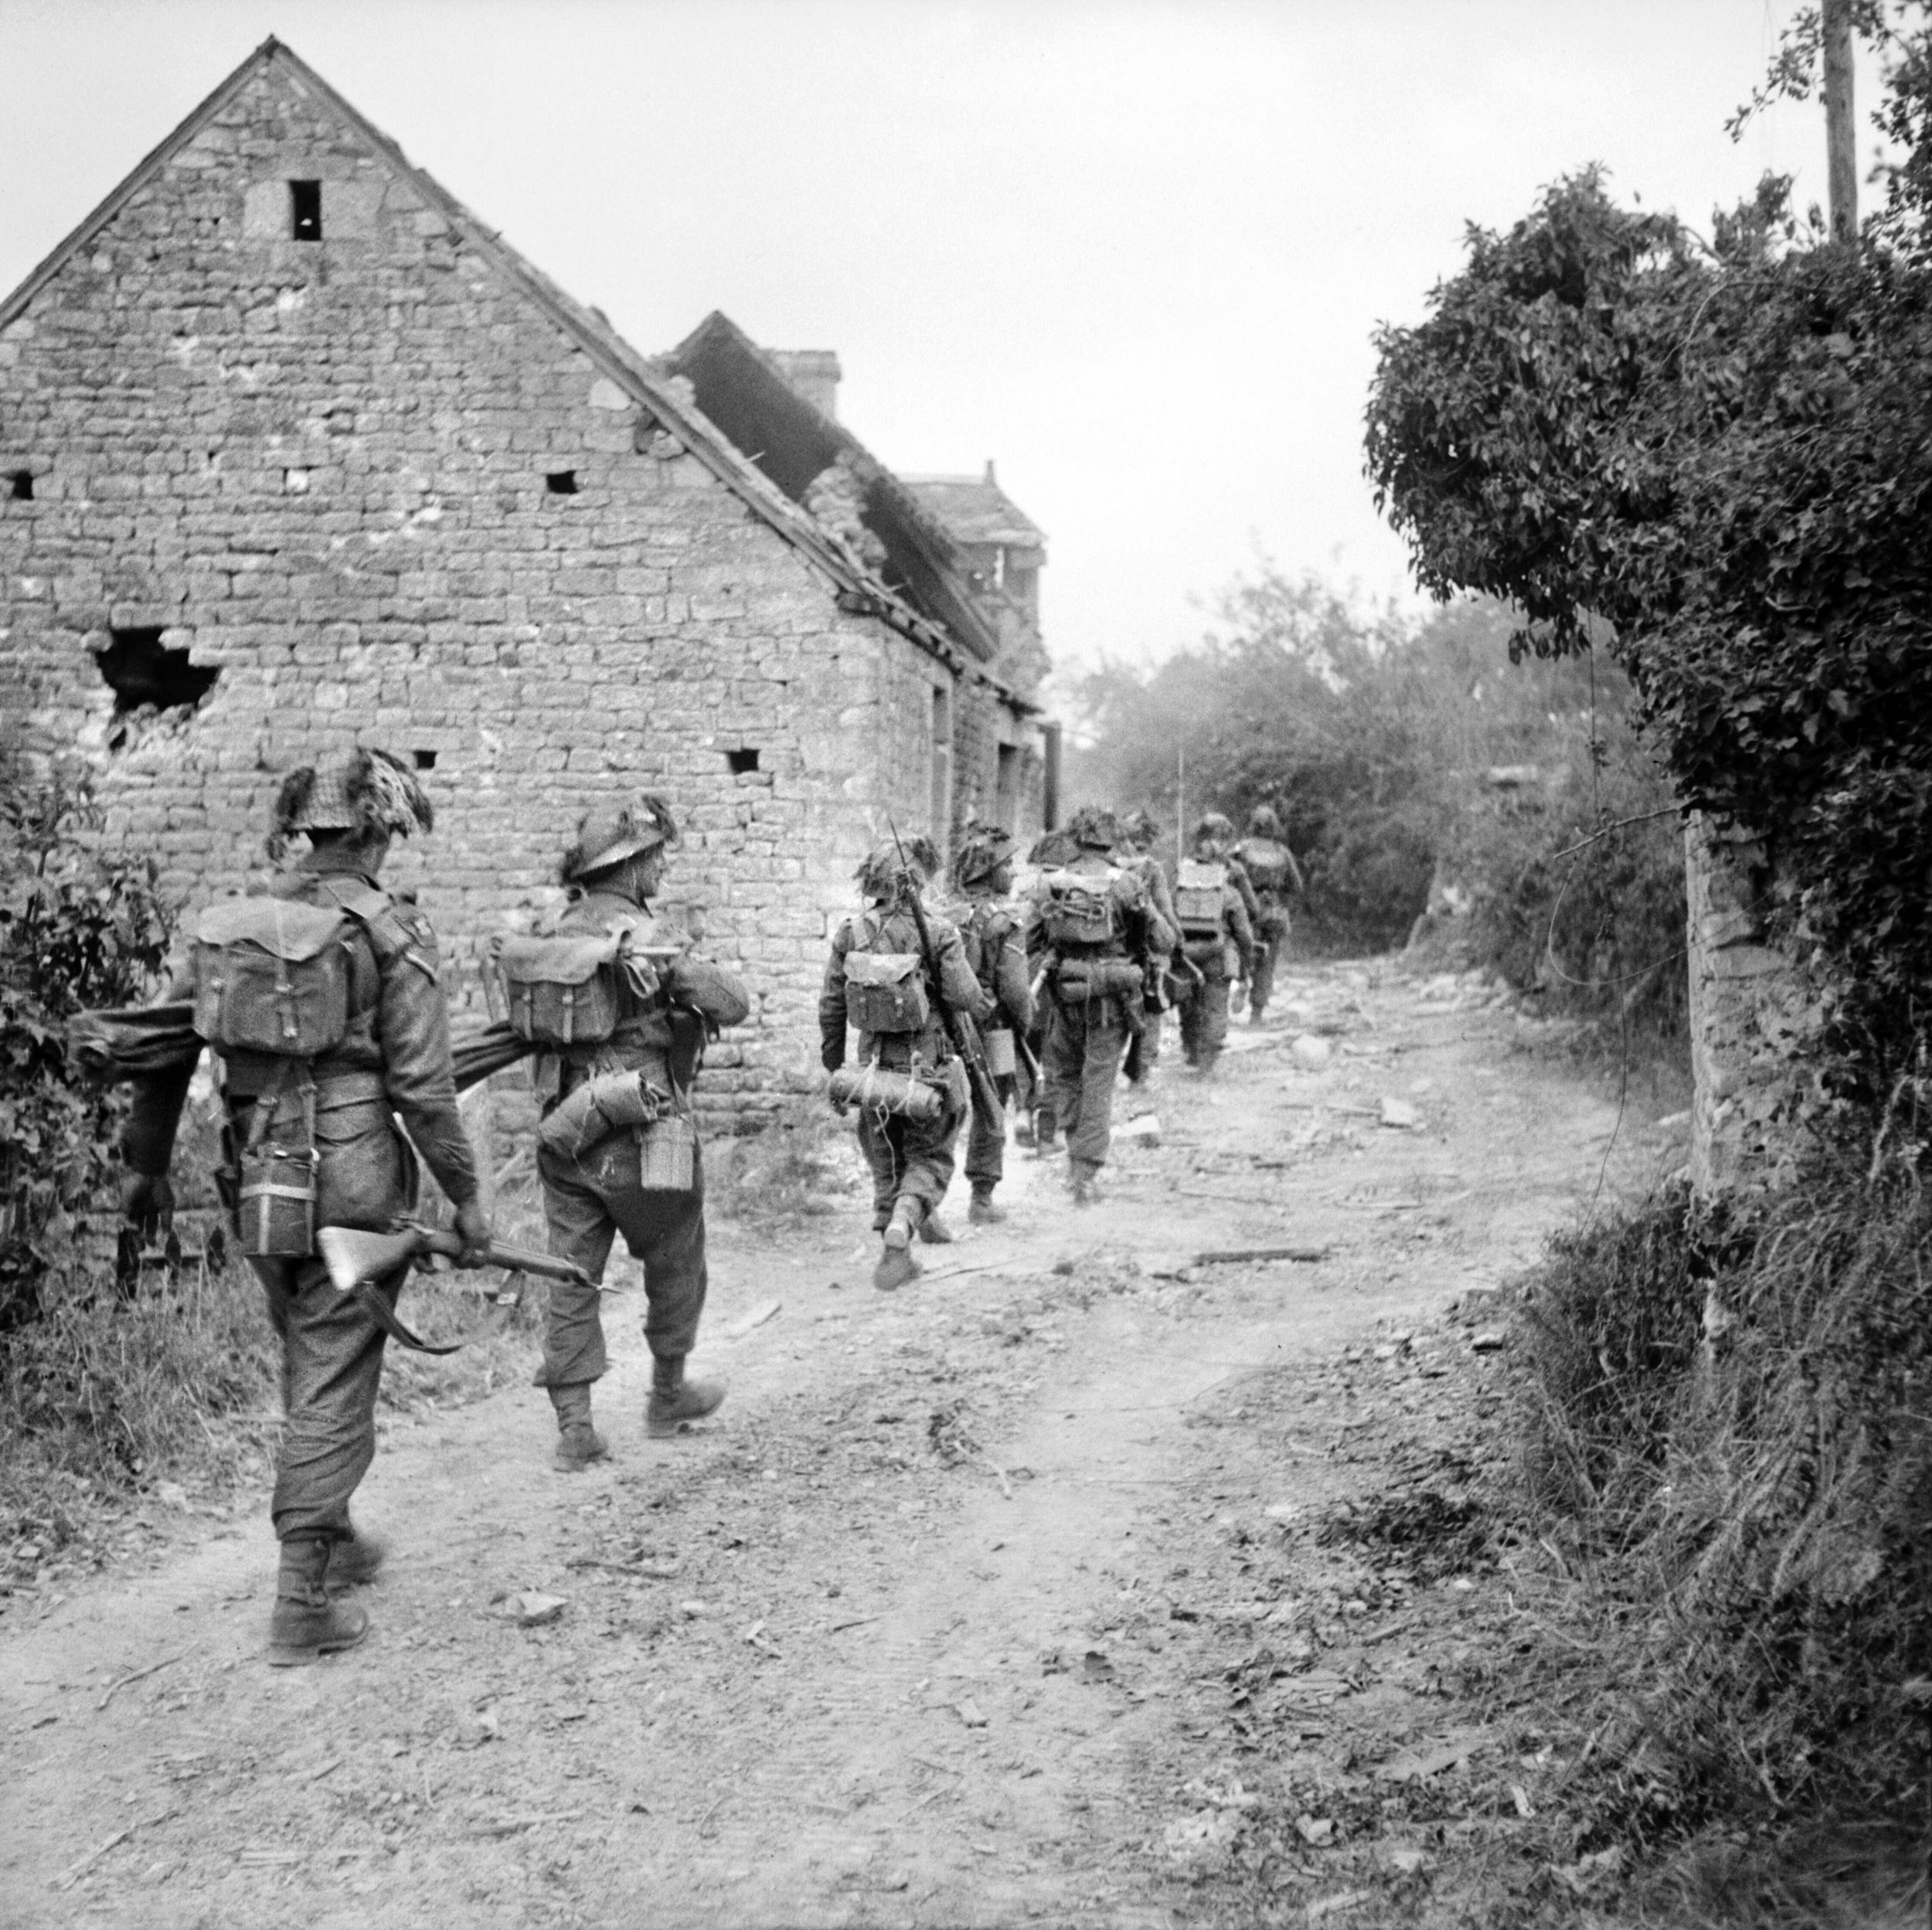 British soldiers of the York and Lancaster Regiment move warily through the French village of Fontenoy-le-Pesnel in Normandy on June 25, 1944. The fight for Caen was long and arduous during the Normandy campaign.